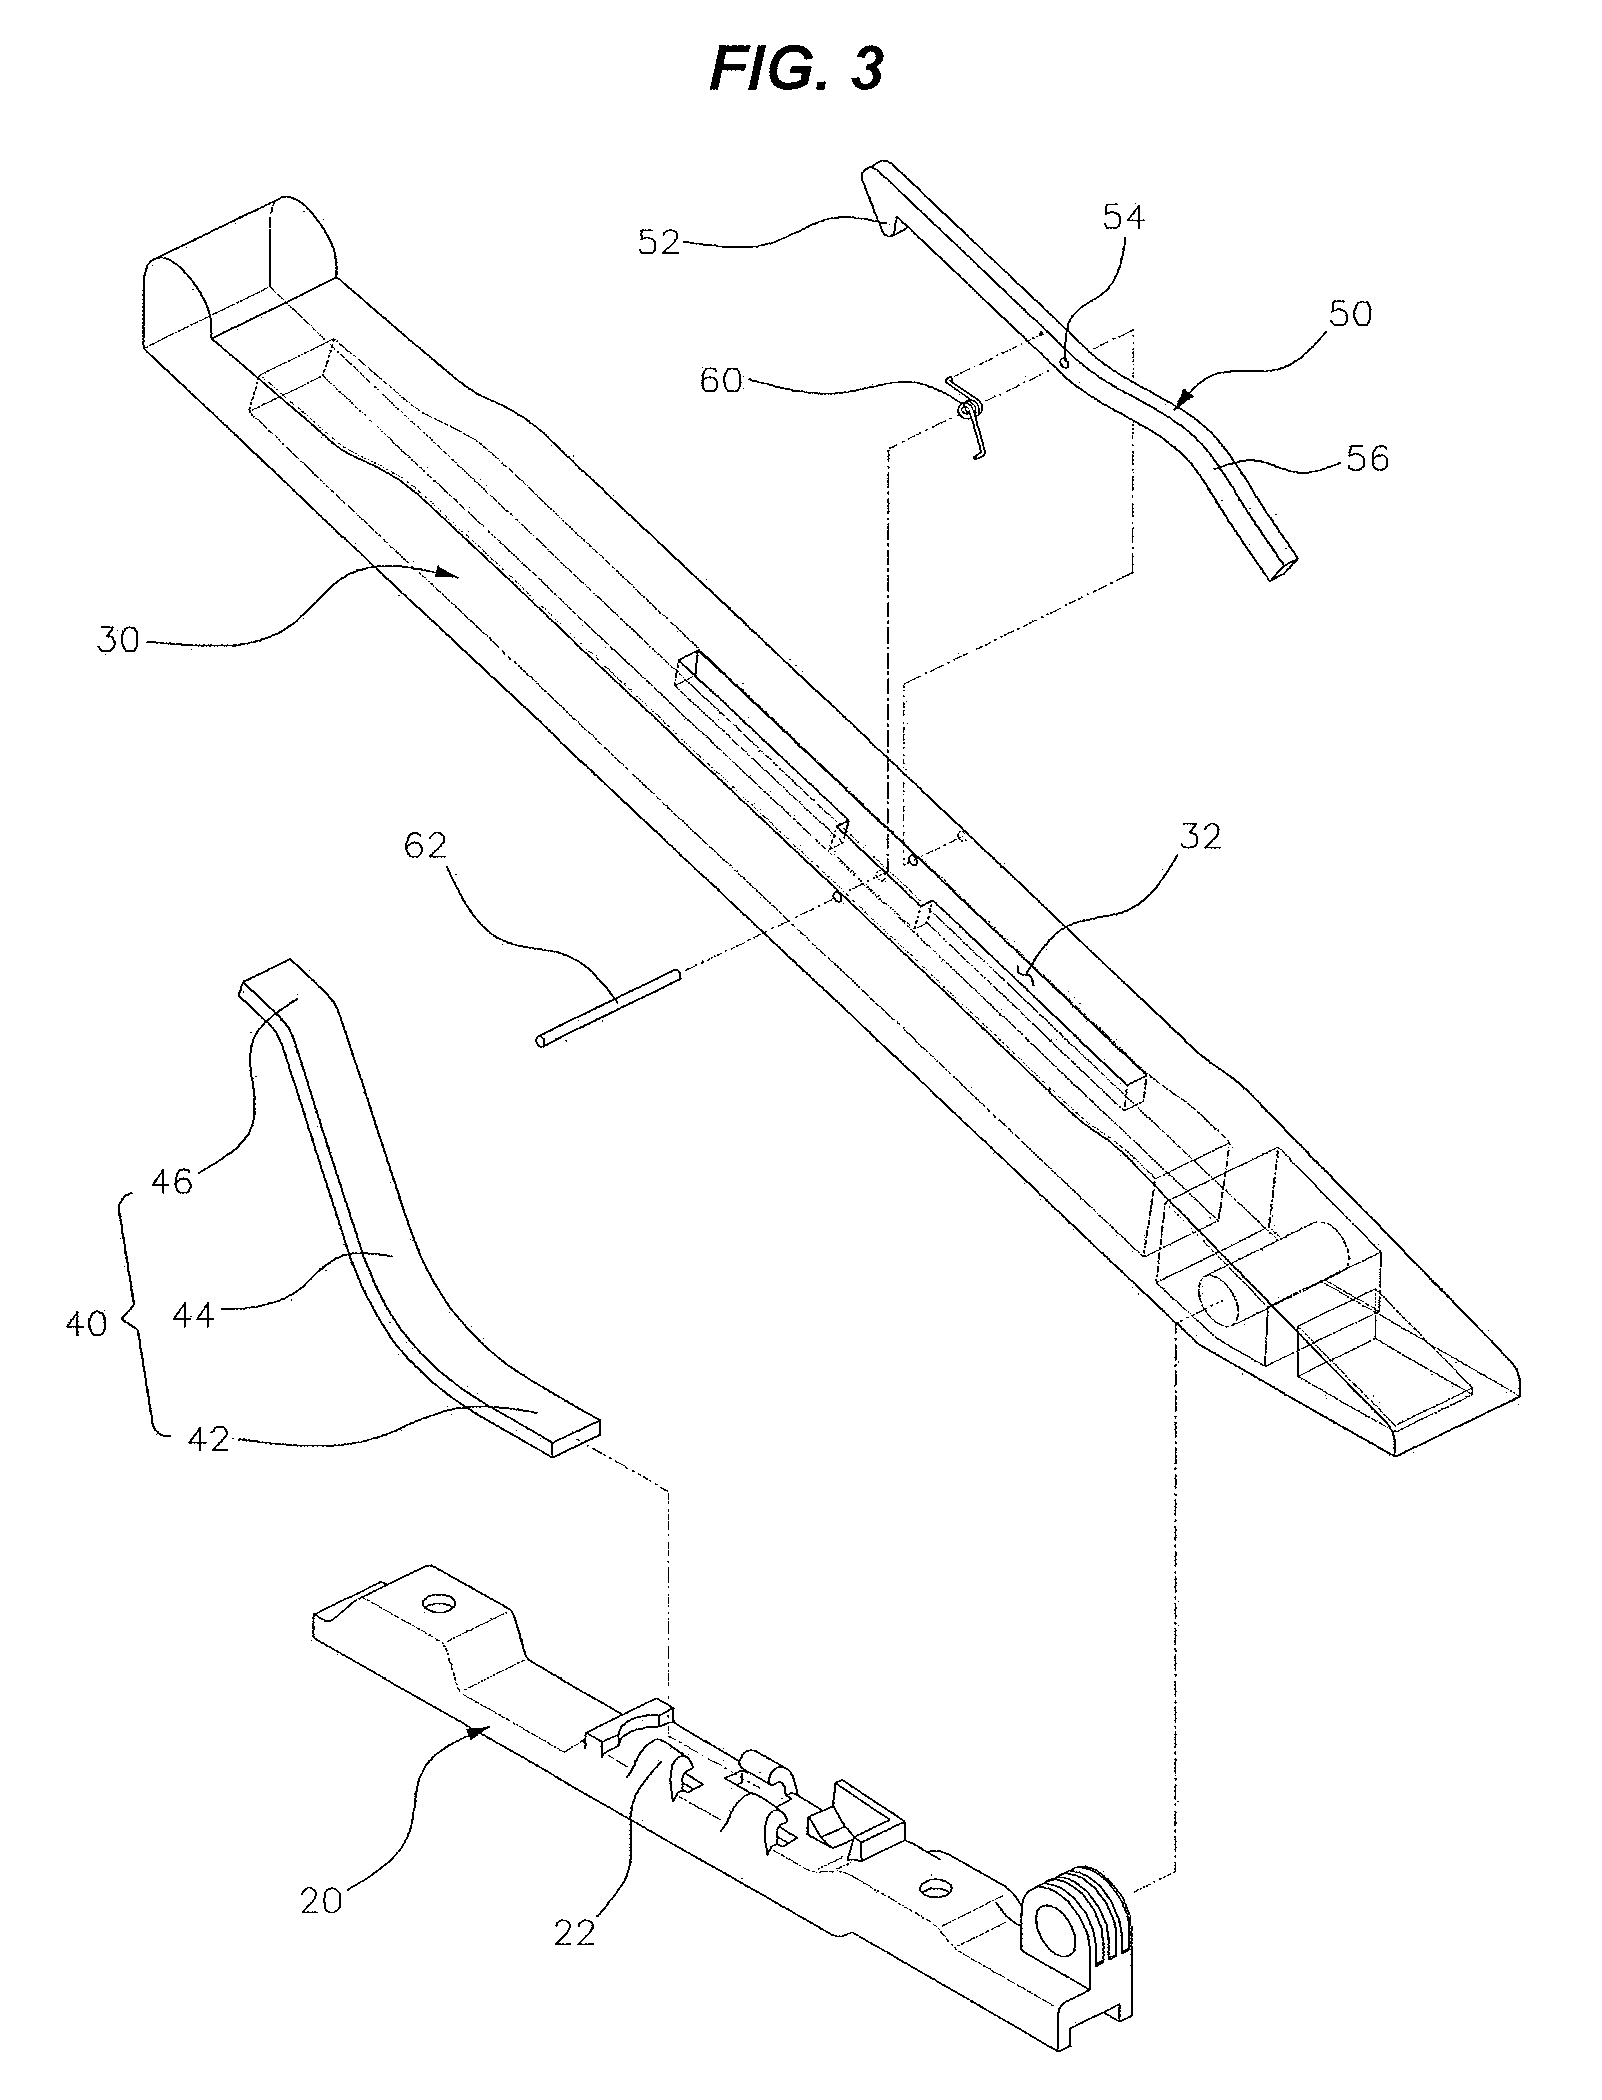 Structure for supporting sun roof deflector